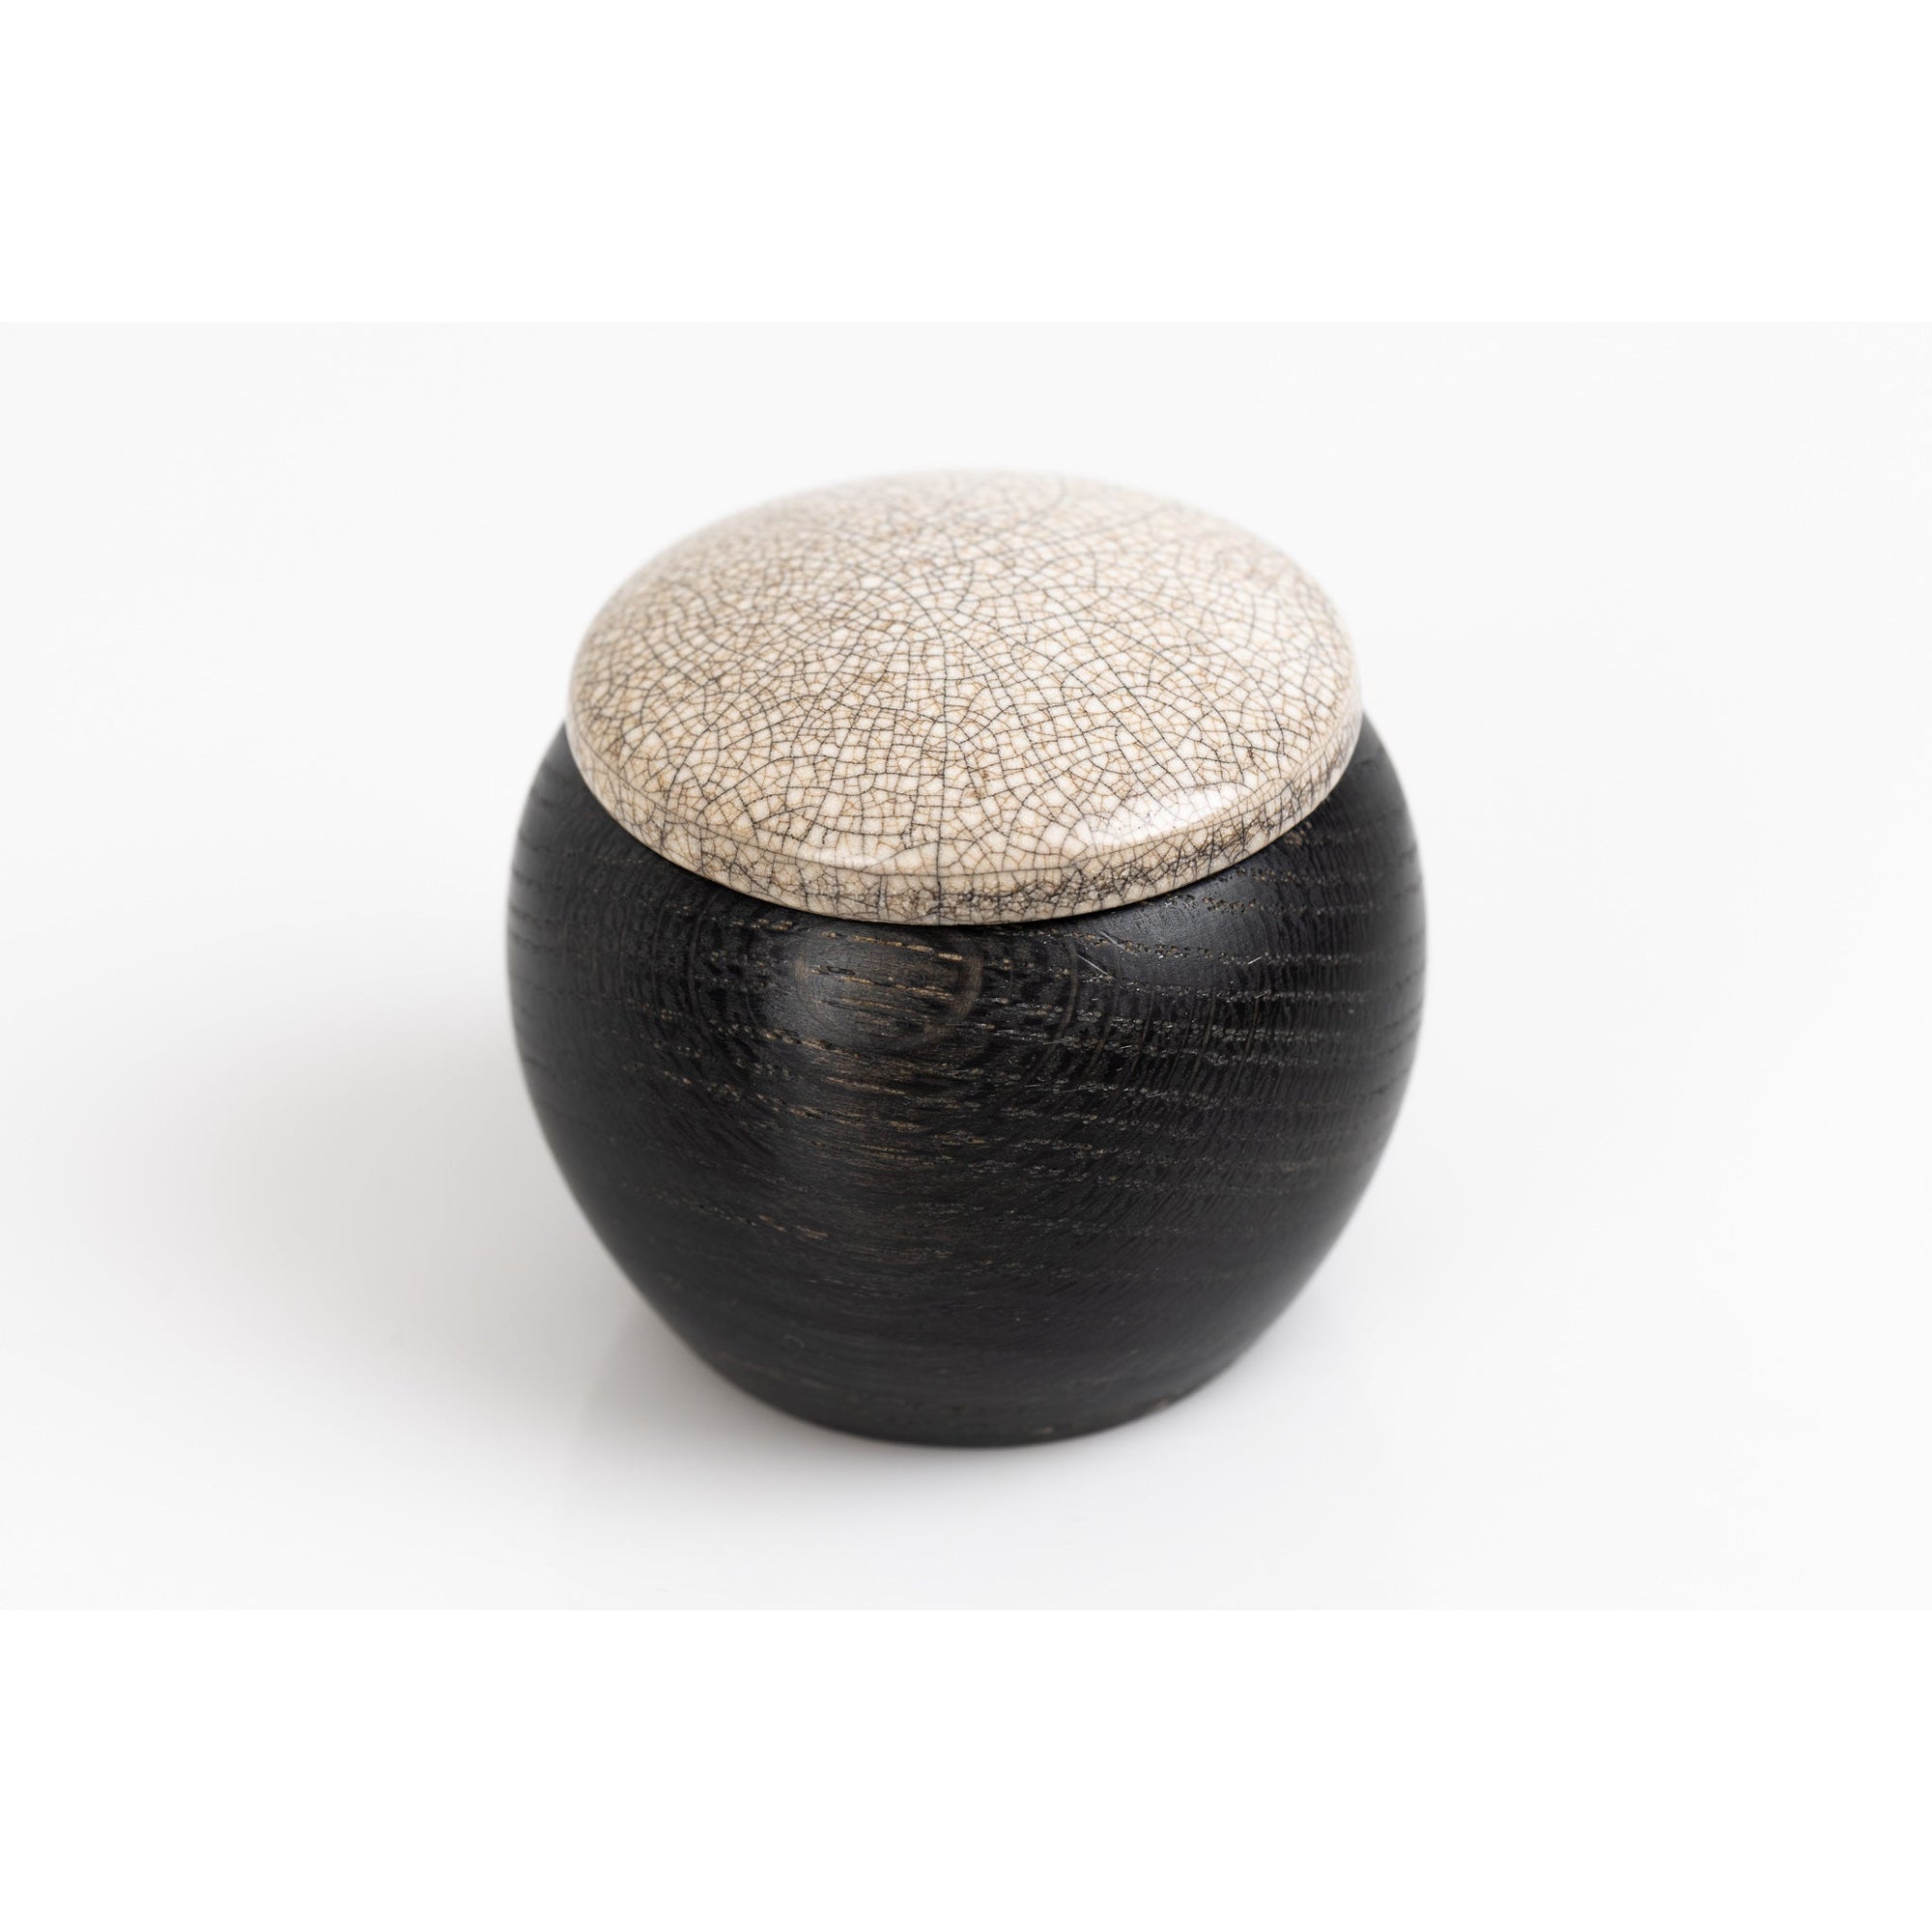 KSCC1 Ebonised Wave Pot by Kate Schuricht, available at Padstow Gallery, Cornwall